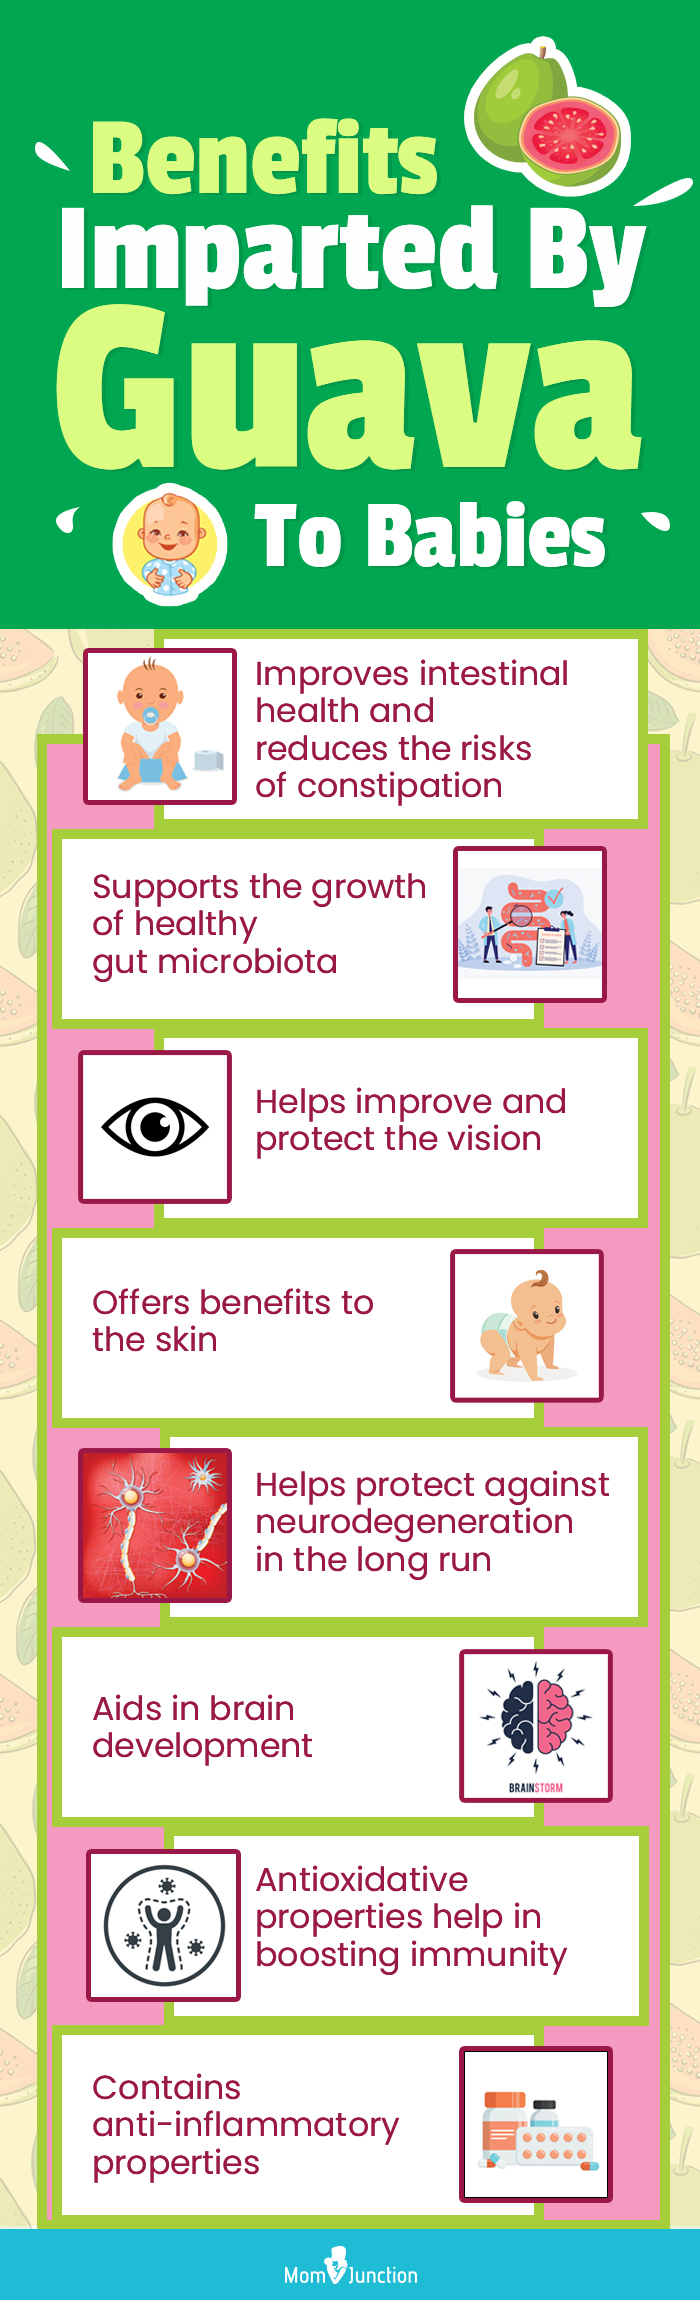 benefits imparted by guava for babies (infographic)